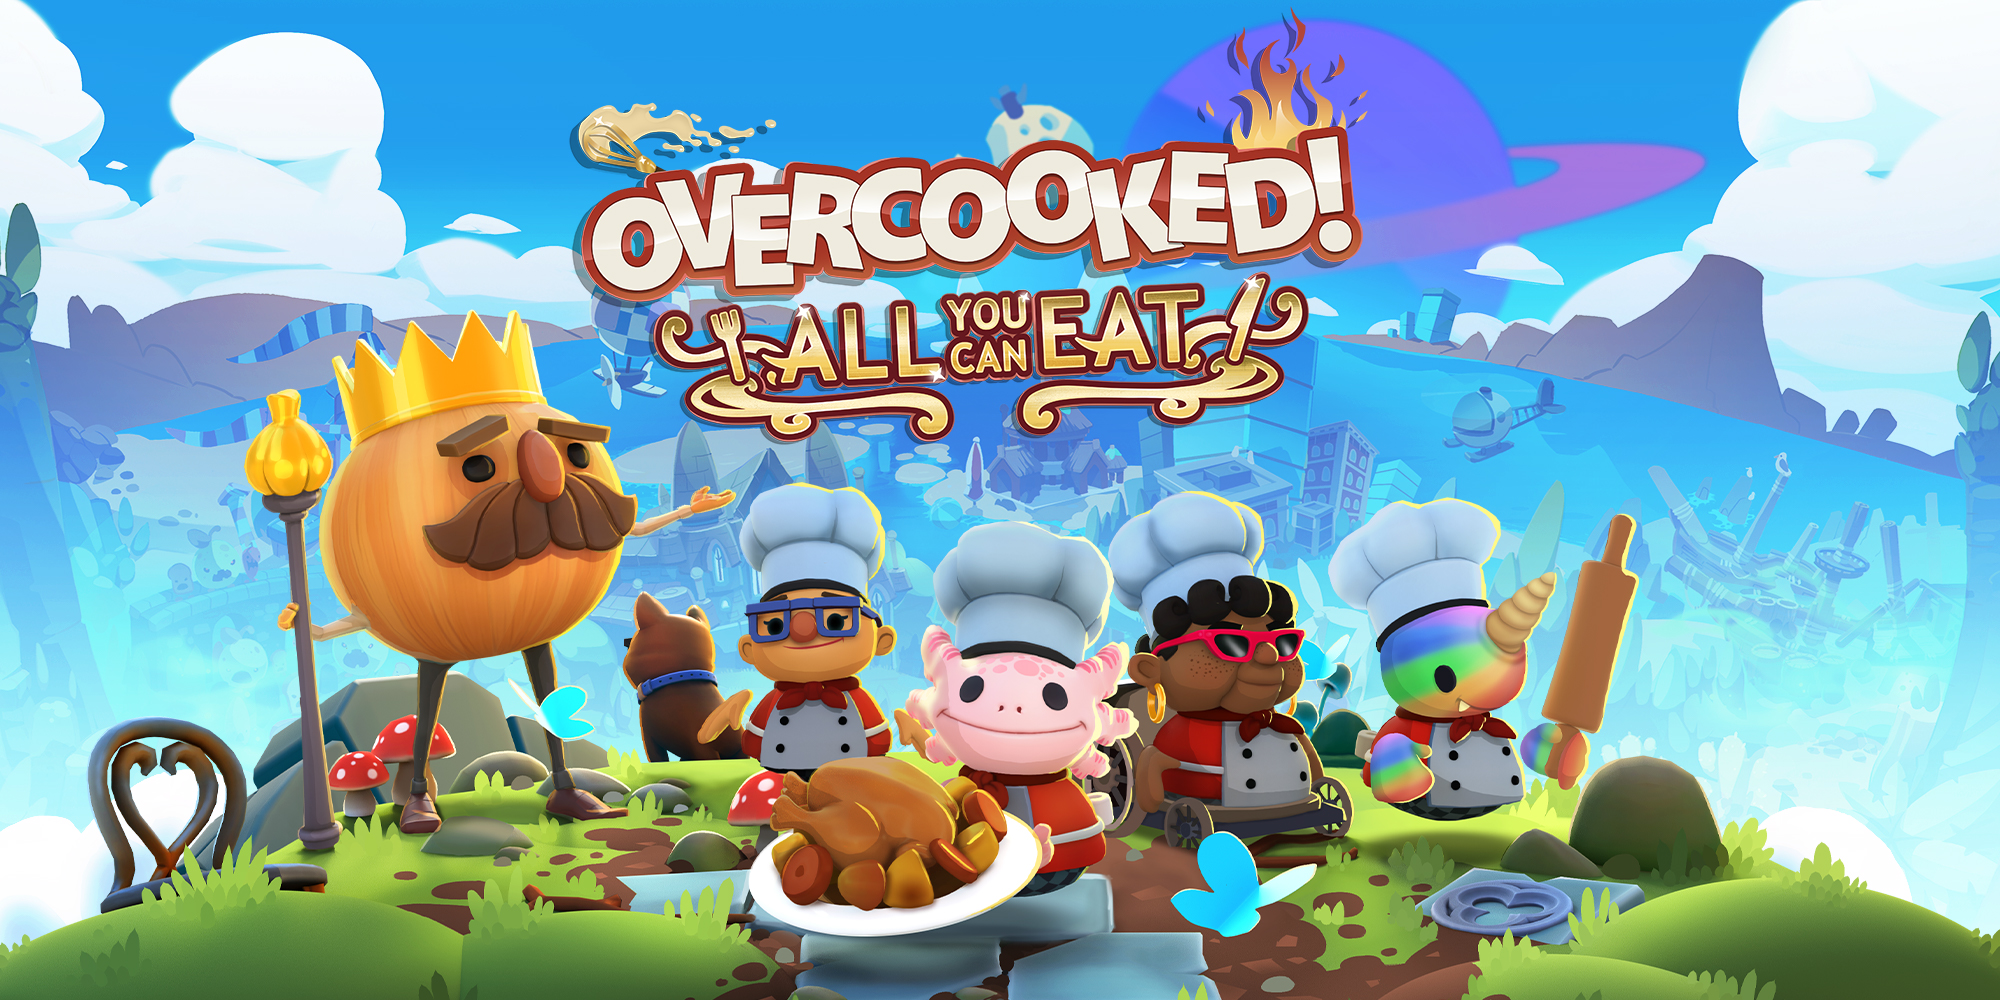 Grote waanidee emmer Bourgondië Overcooked! All You Can Eat | Nintendo Switch-games | Games | Nintendo